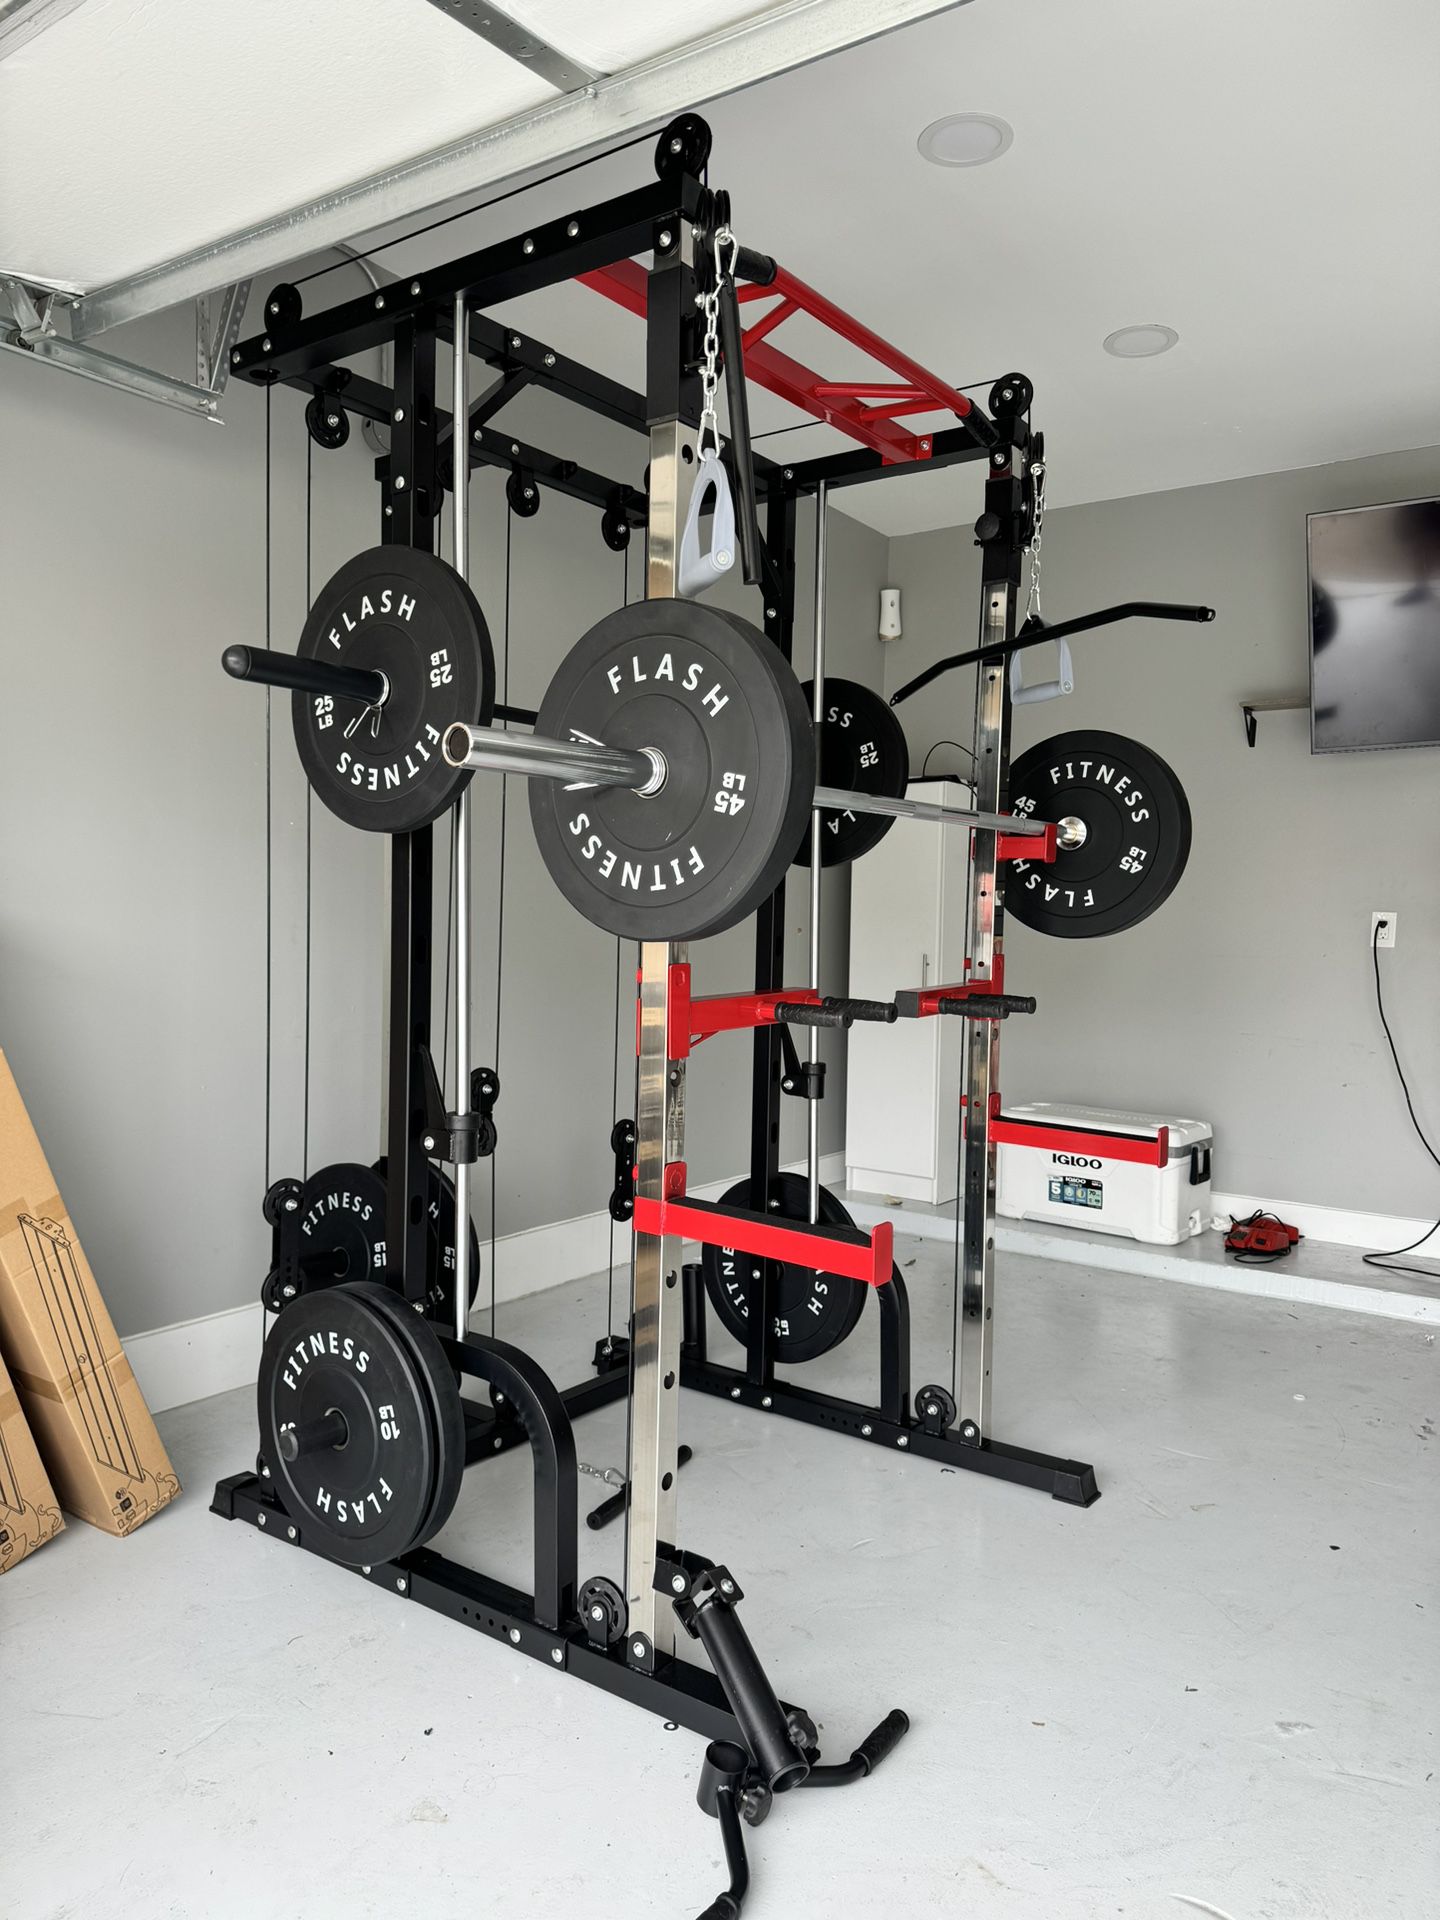 Flash f10 smith Machine And Dumbbell Set Combo Free DELIVERY 🚚🚚 FREE ASSEMBLY ⚙️🔧